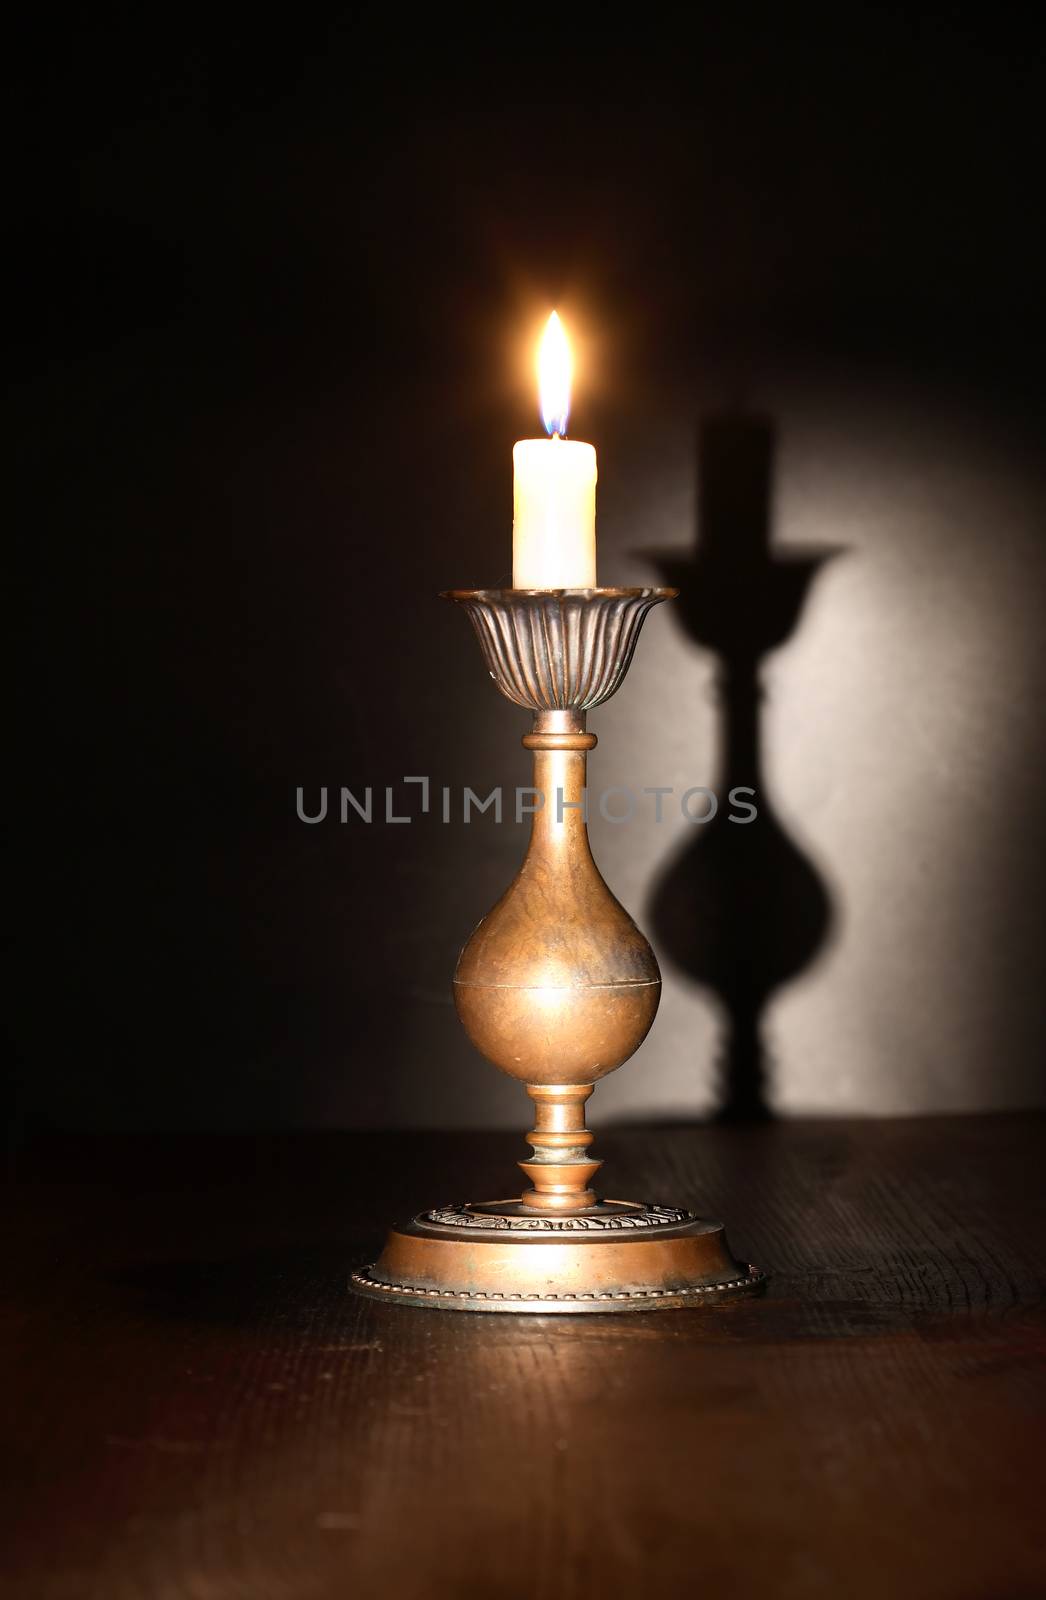 Elegant brass candlestick with lighting candle on dark background